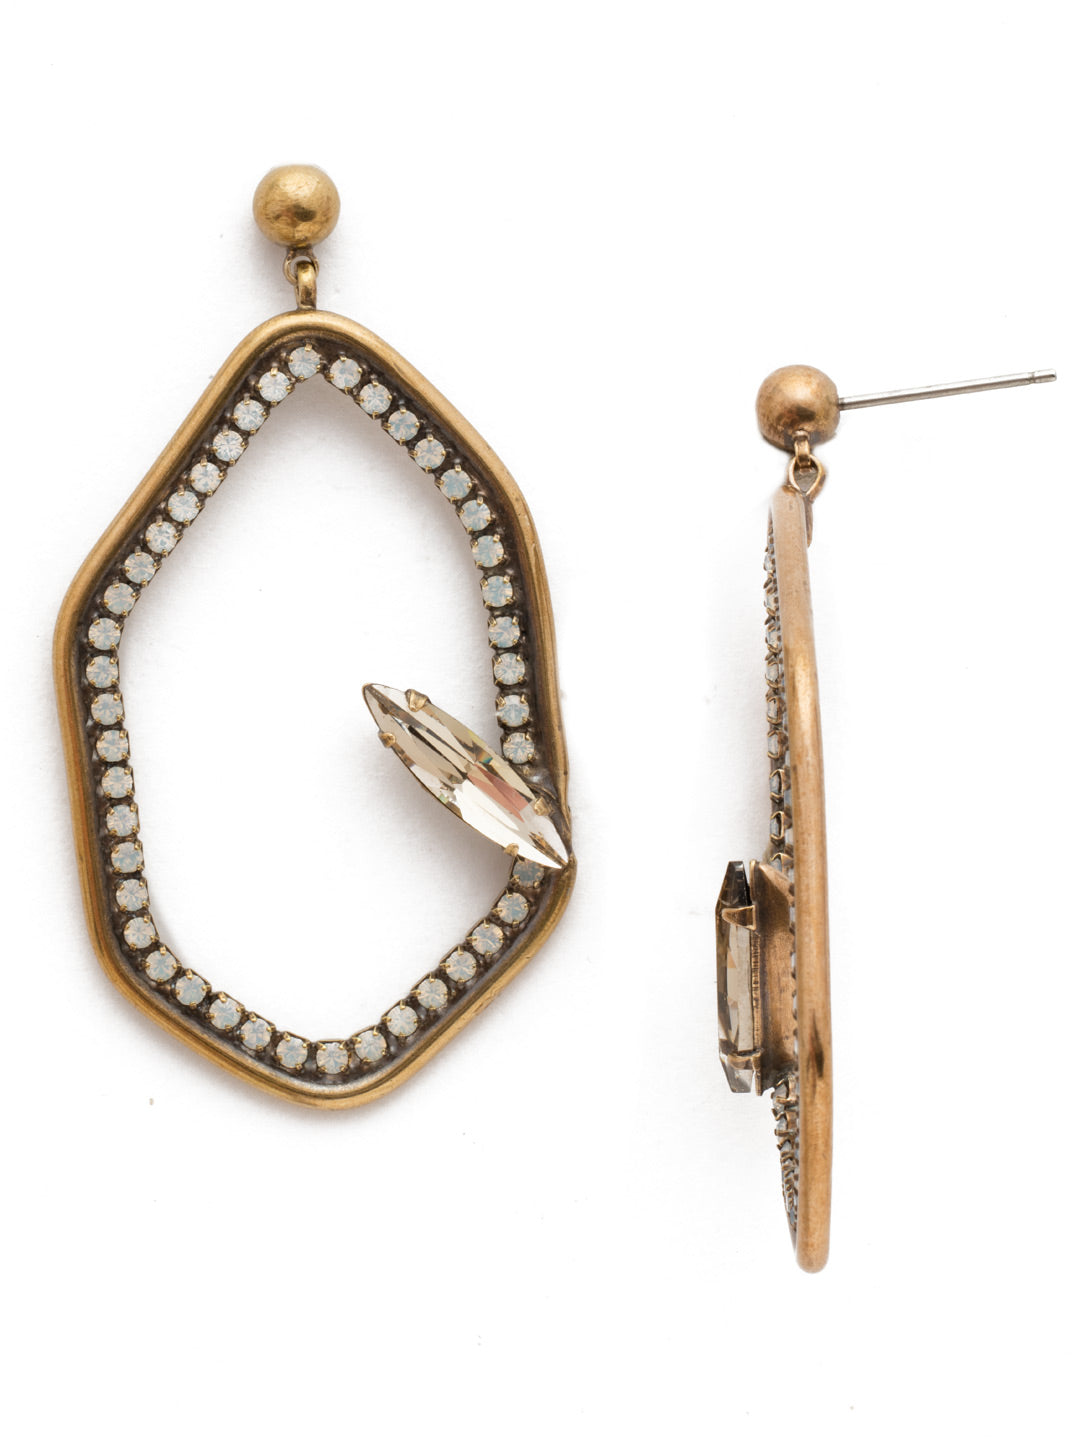 Gemma Dangle Earrings - EEH28AGROB - <p>These posts are long on style. Fasten on the fun shape surrounded by sparkling crystal pieces and you're sure to be the center of attention. From Sorrelli's Rocky Beach collection in our Antique Gold-tone finish.</p>